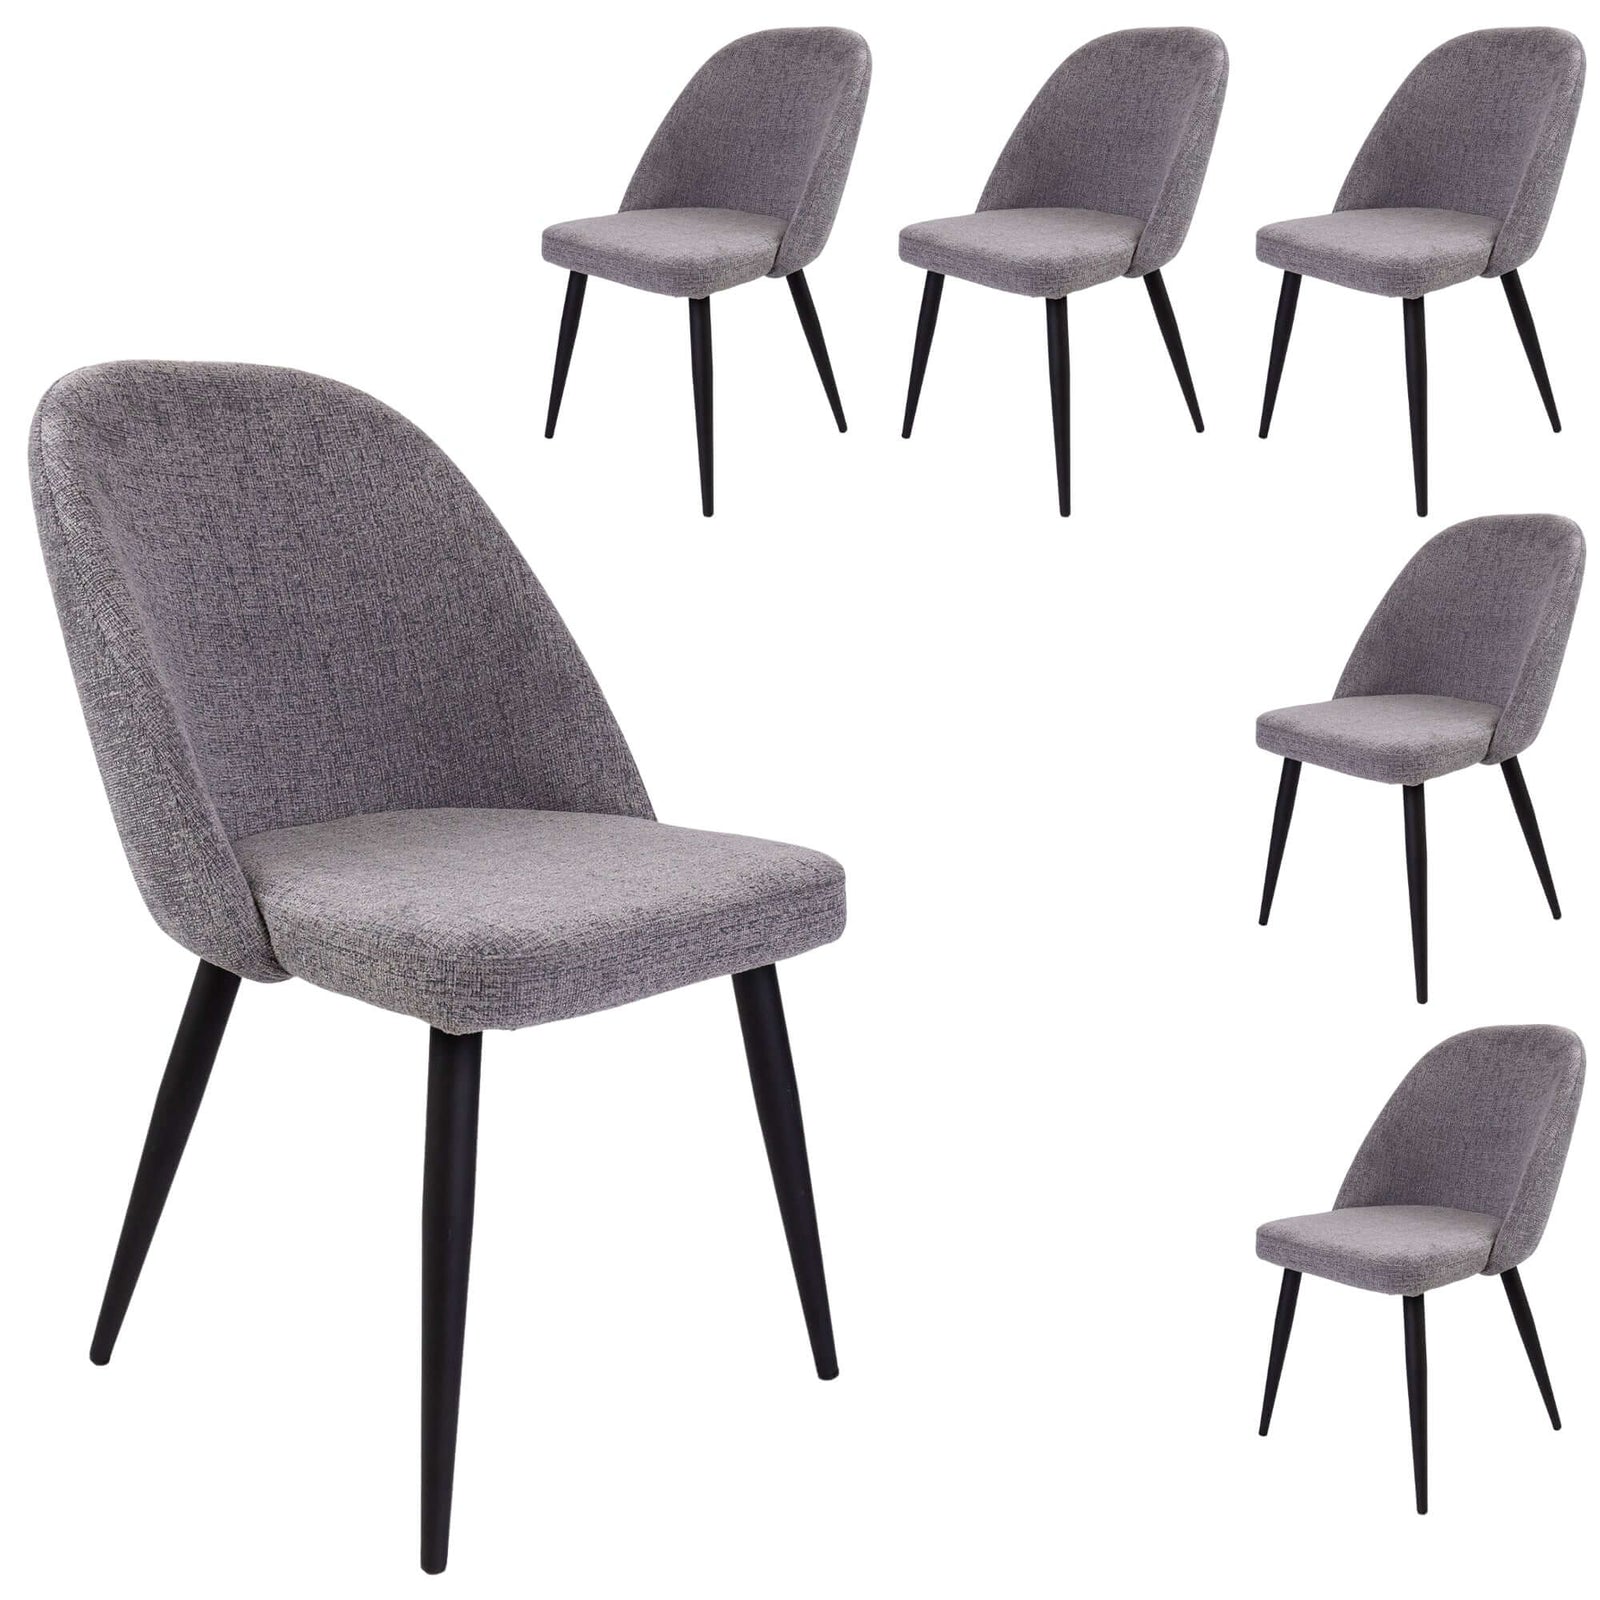 Erin Dining Chair Set of 6 Fabric Seat with Metal Frame - Fog-Upinteriors